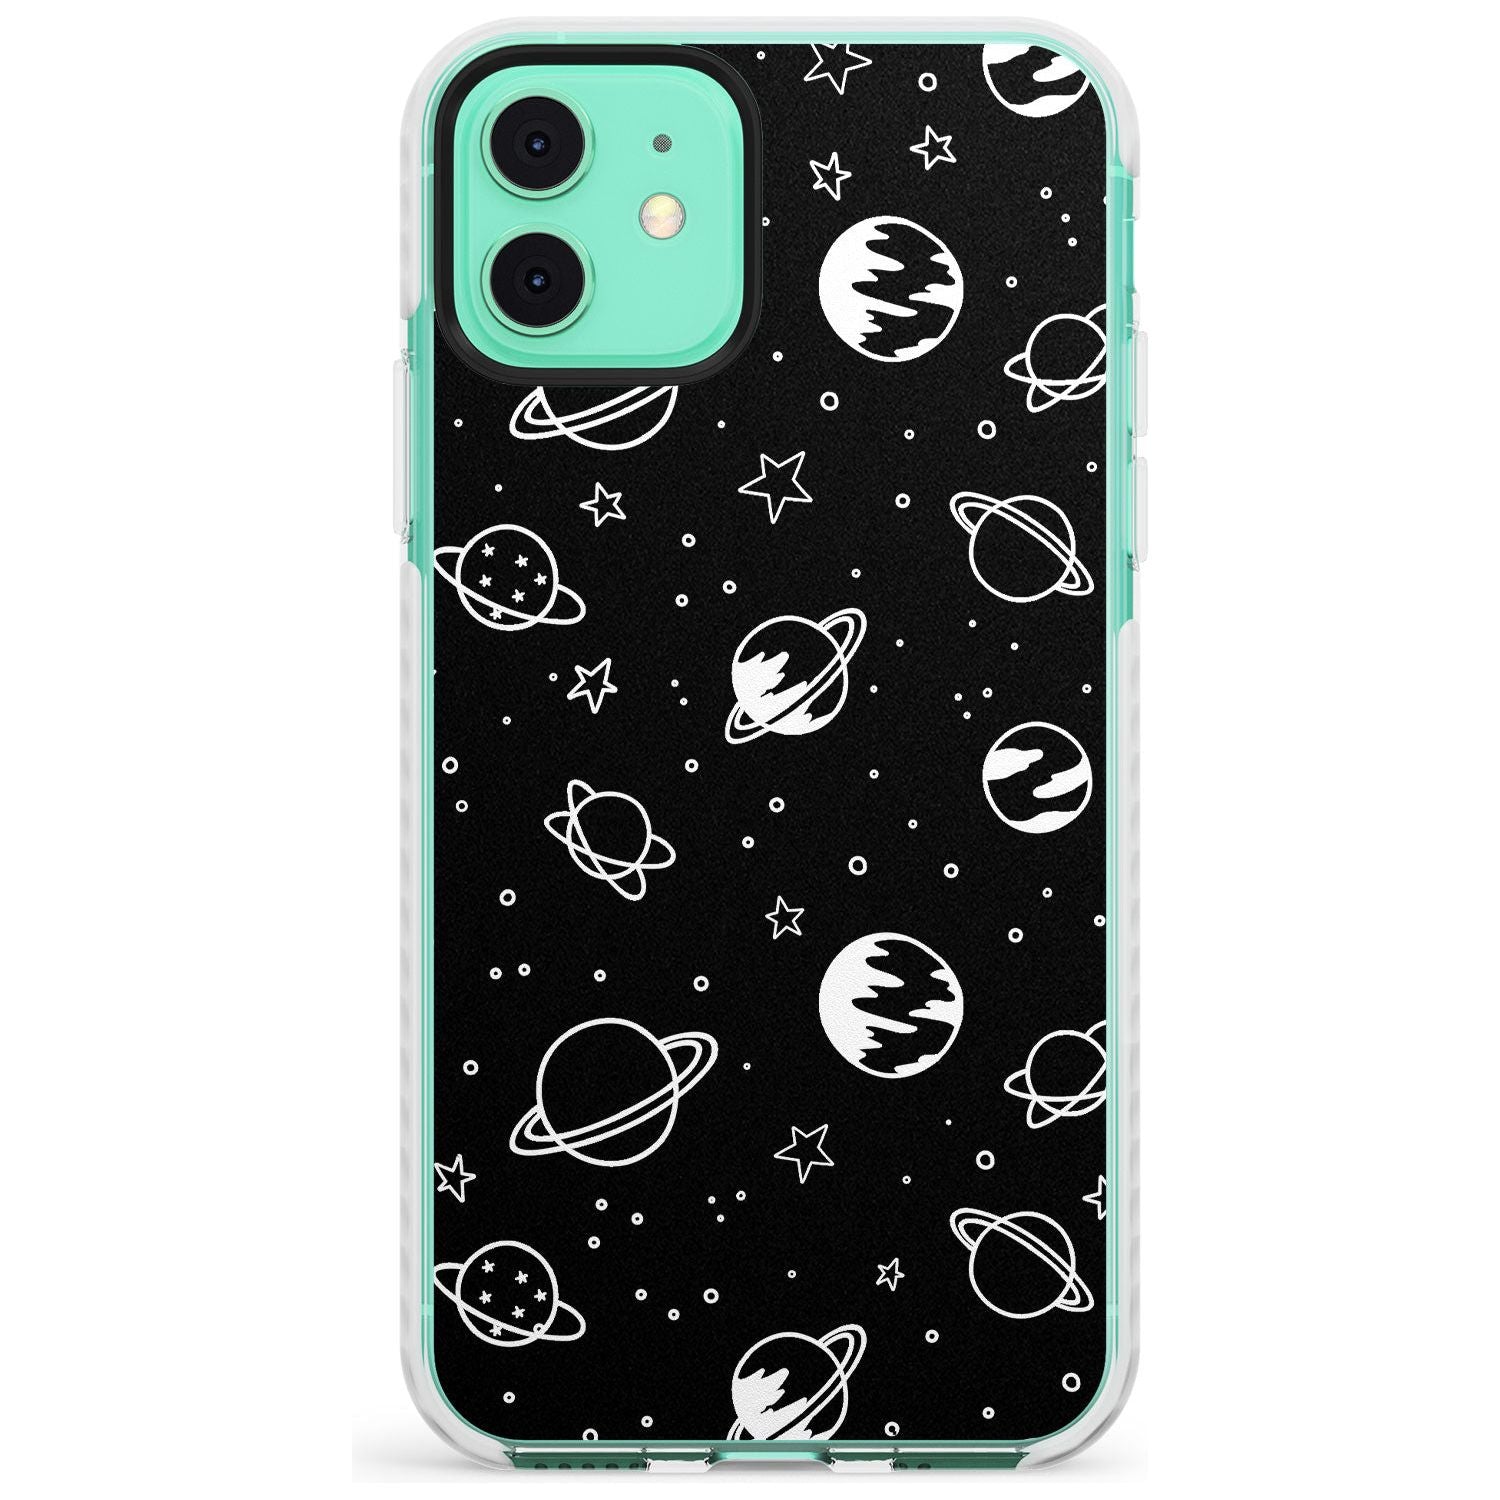 Outer Space Outlines: White on Black Slim TPU Phone Case for iPhone 11